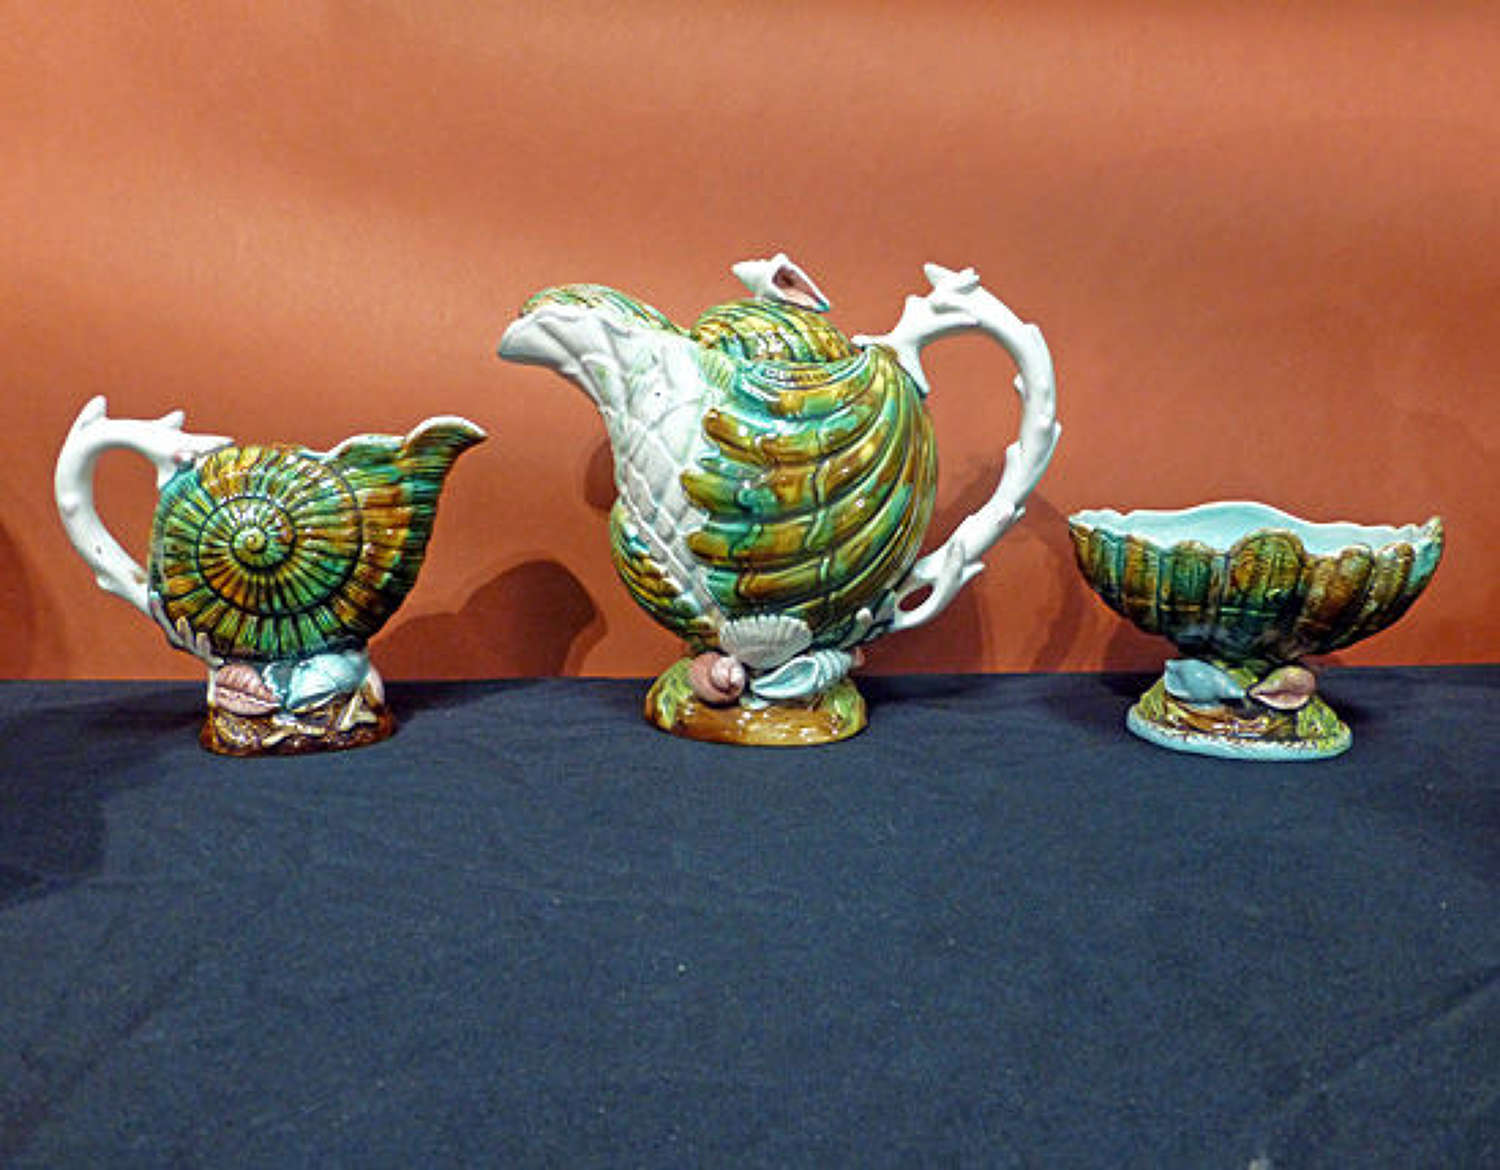 Extremely rare and unusual Samuel Lear majolica shell motif teaset